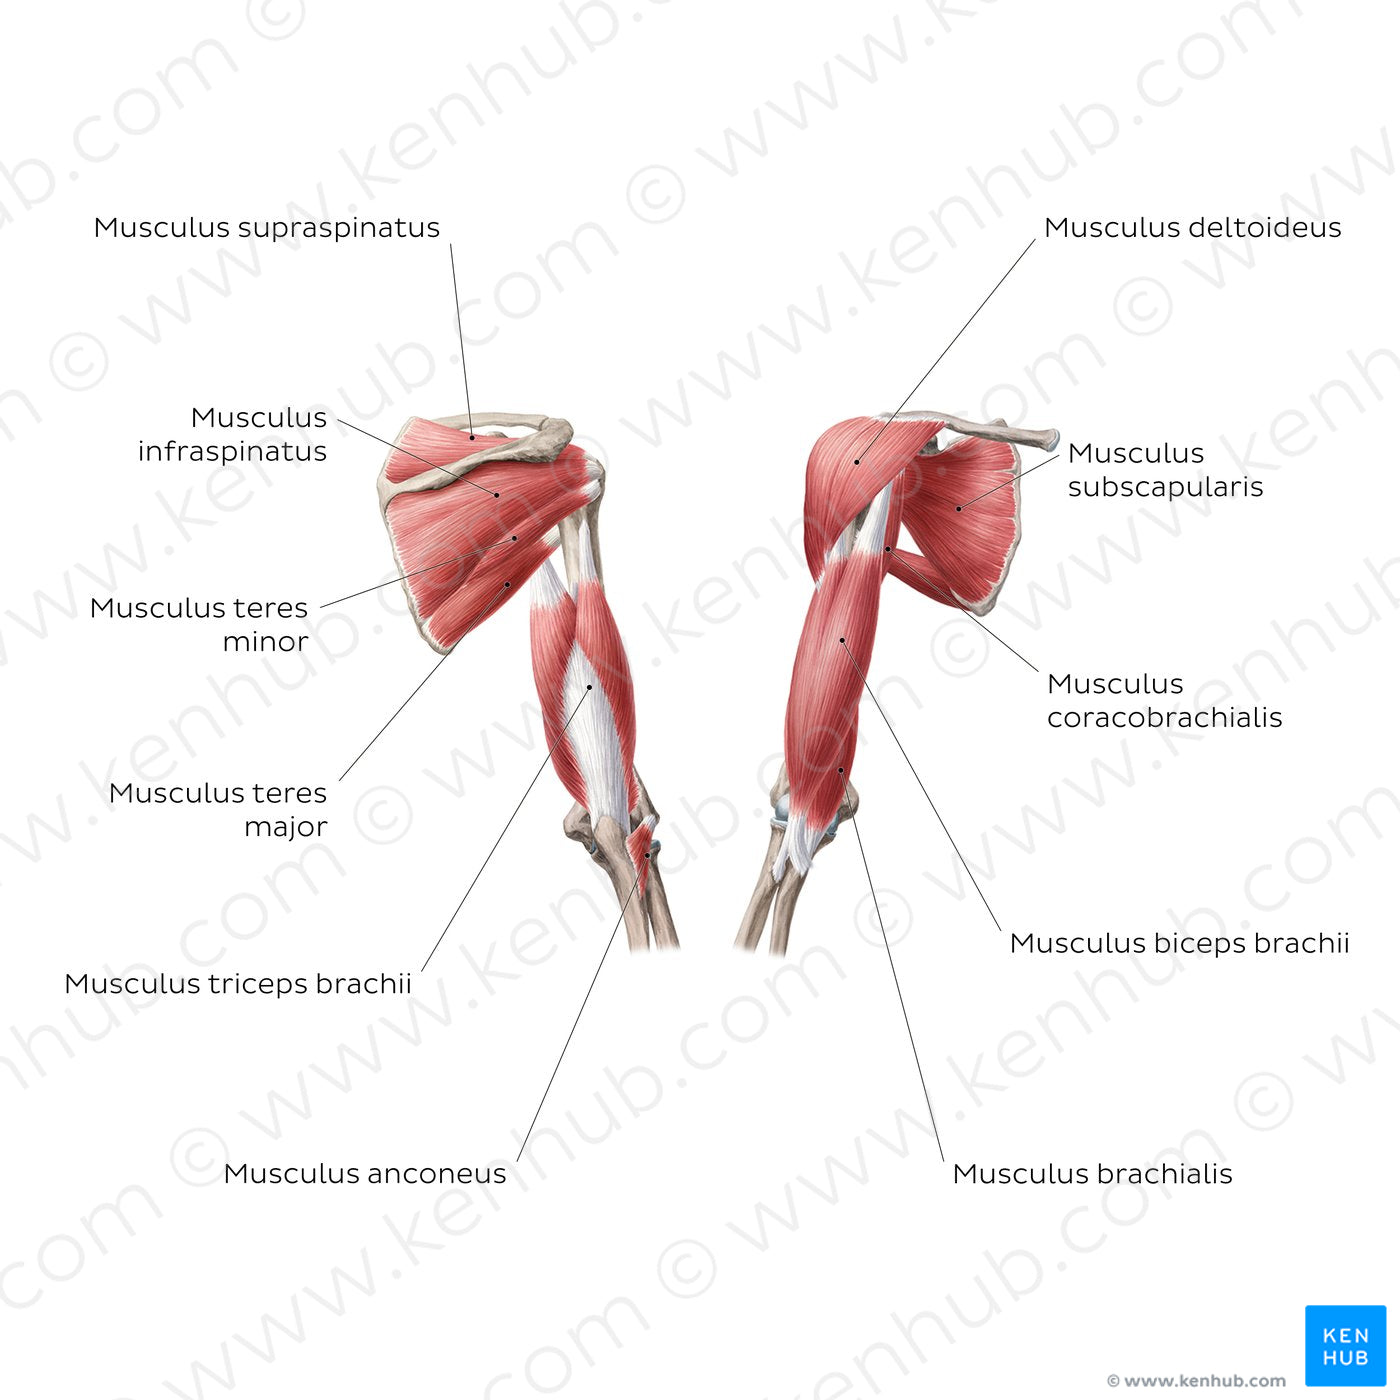 Muscles of the arm and shoulder (Latin)